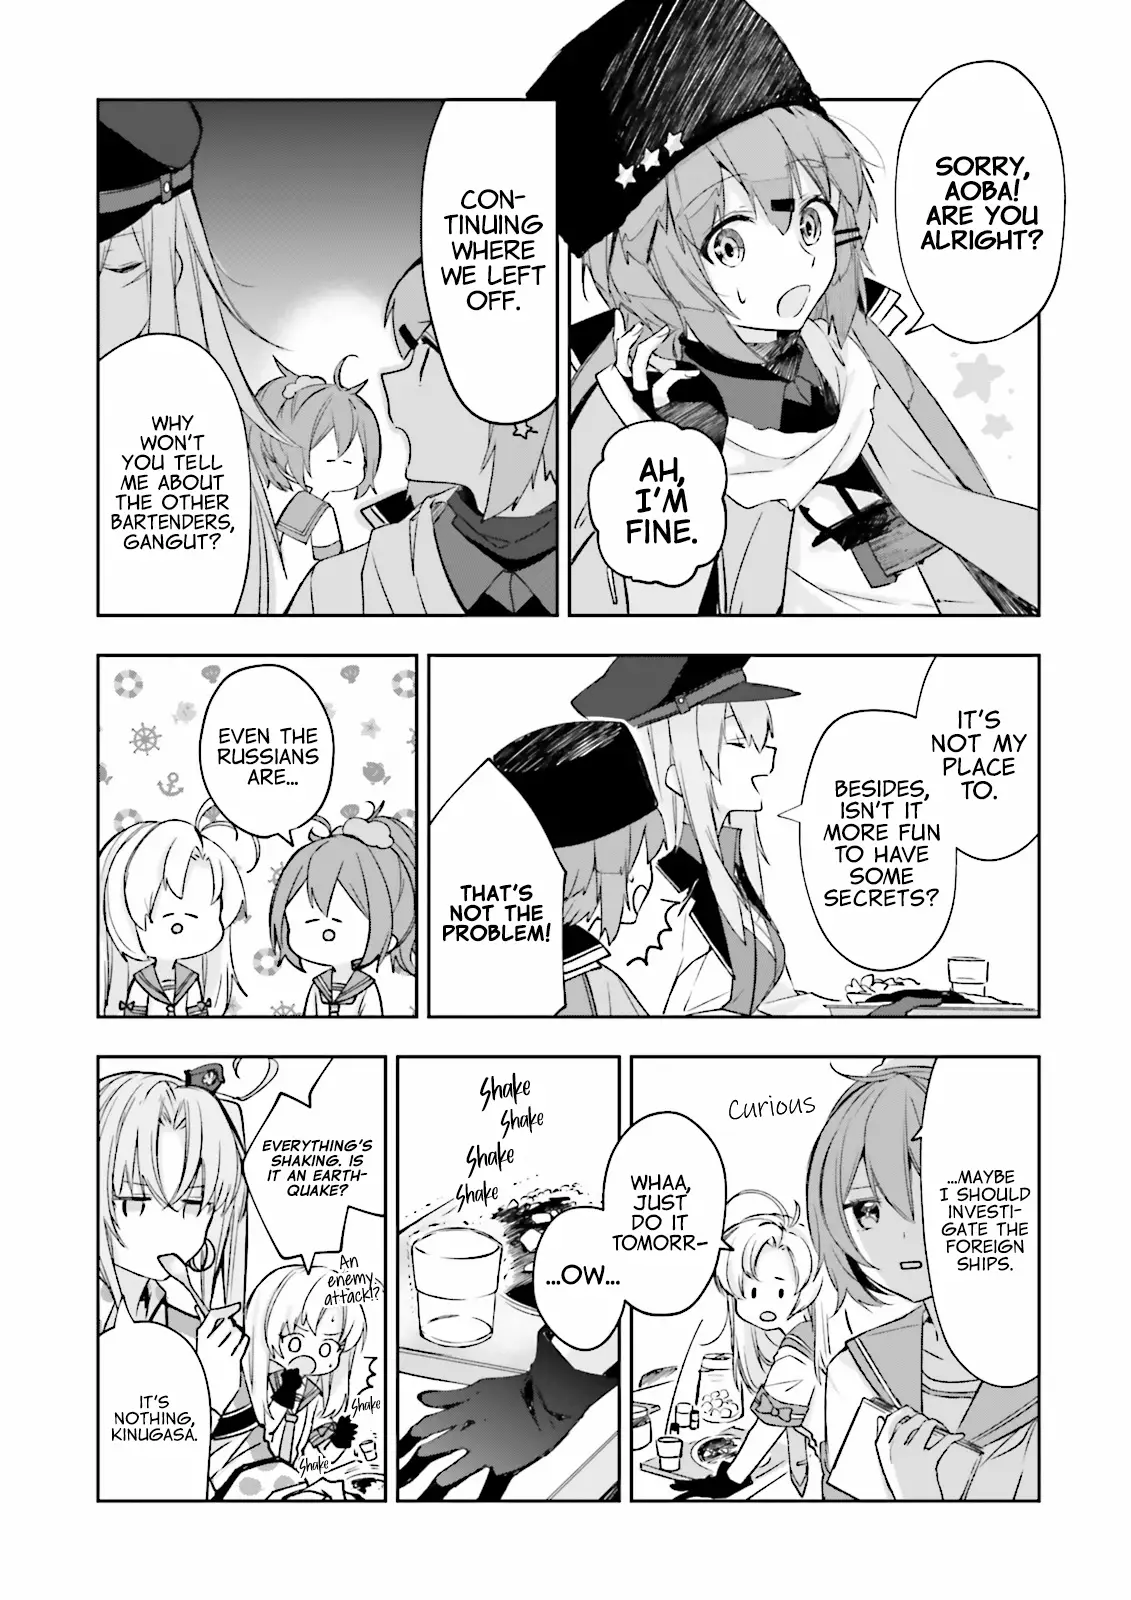 Kantai Collection -Kancolle- Tonight, Another "salute"! - 11 page 4